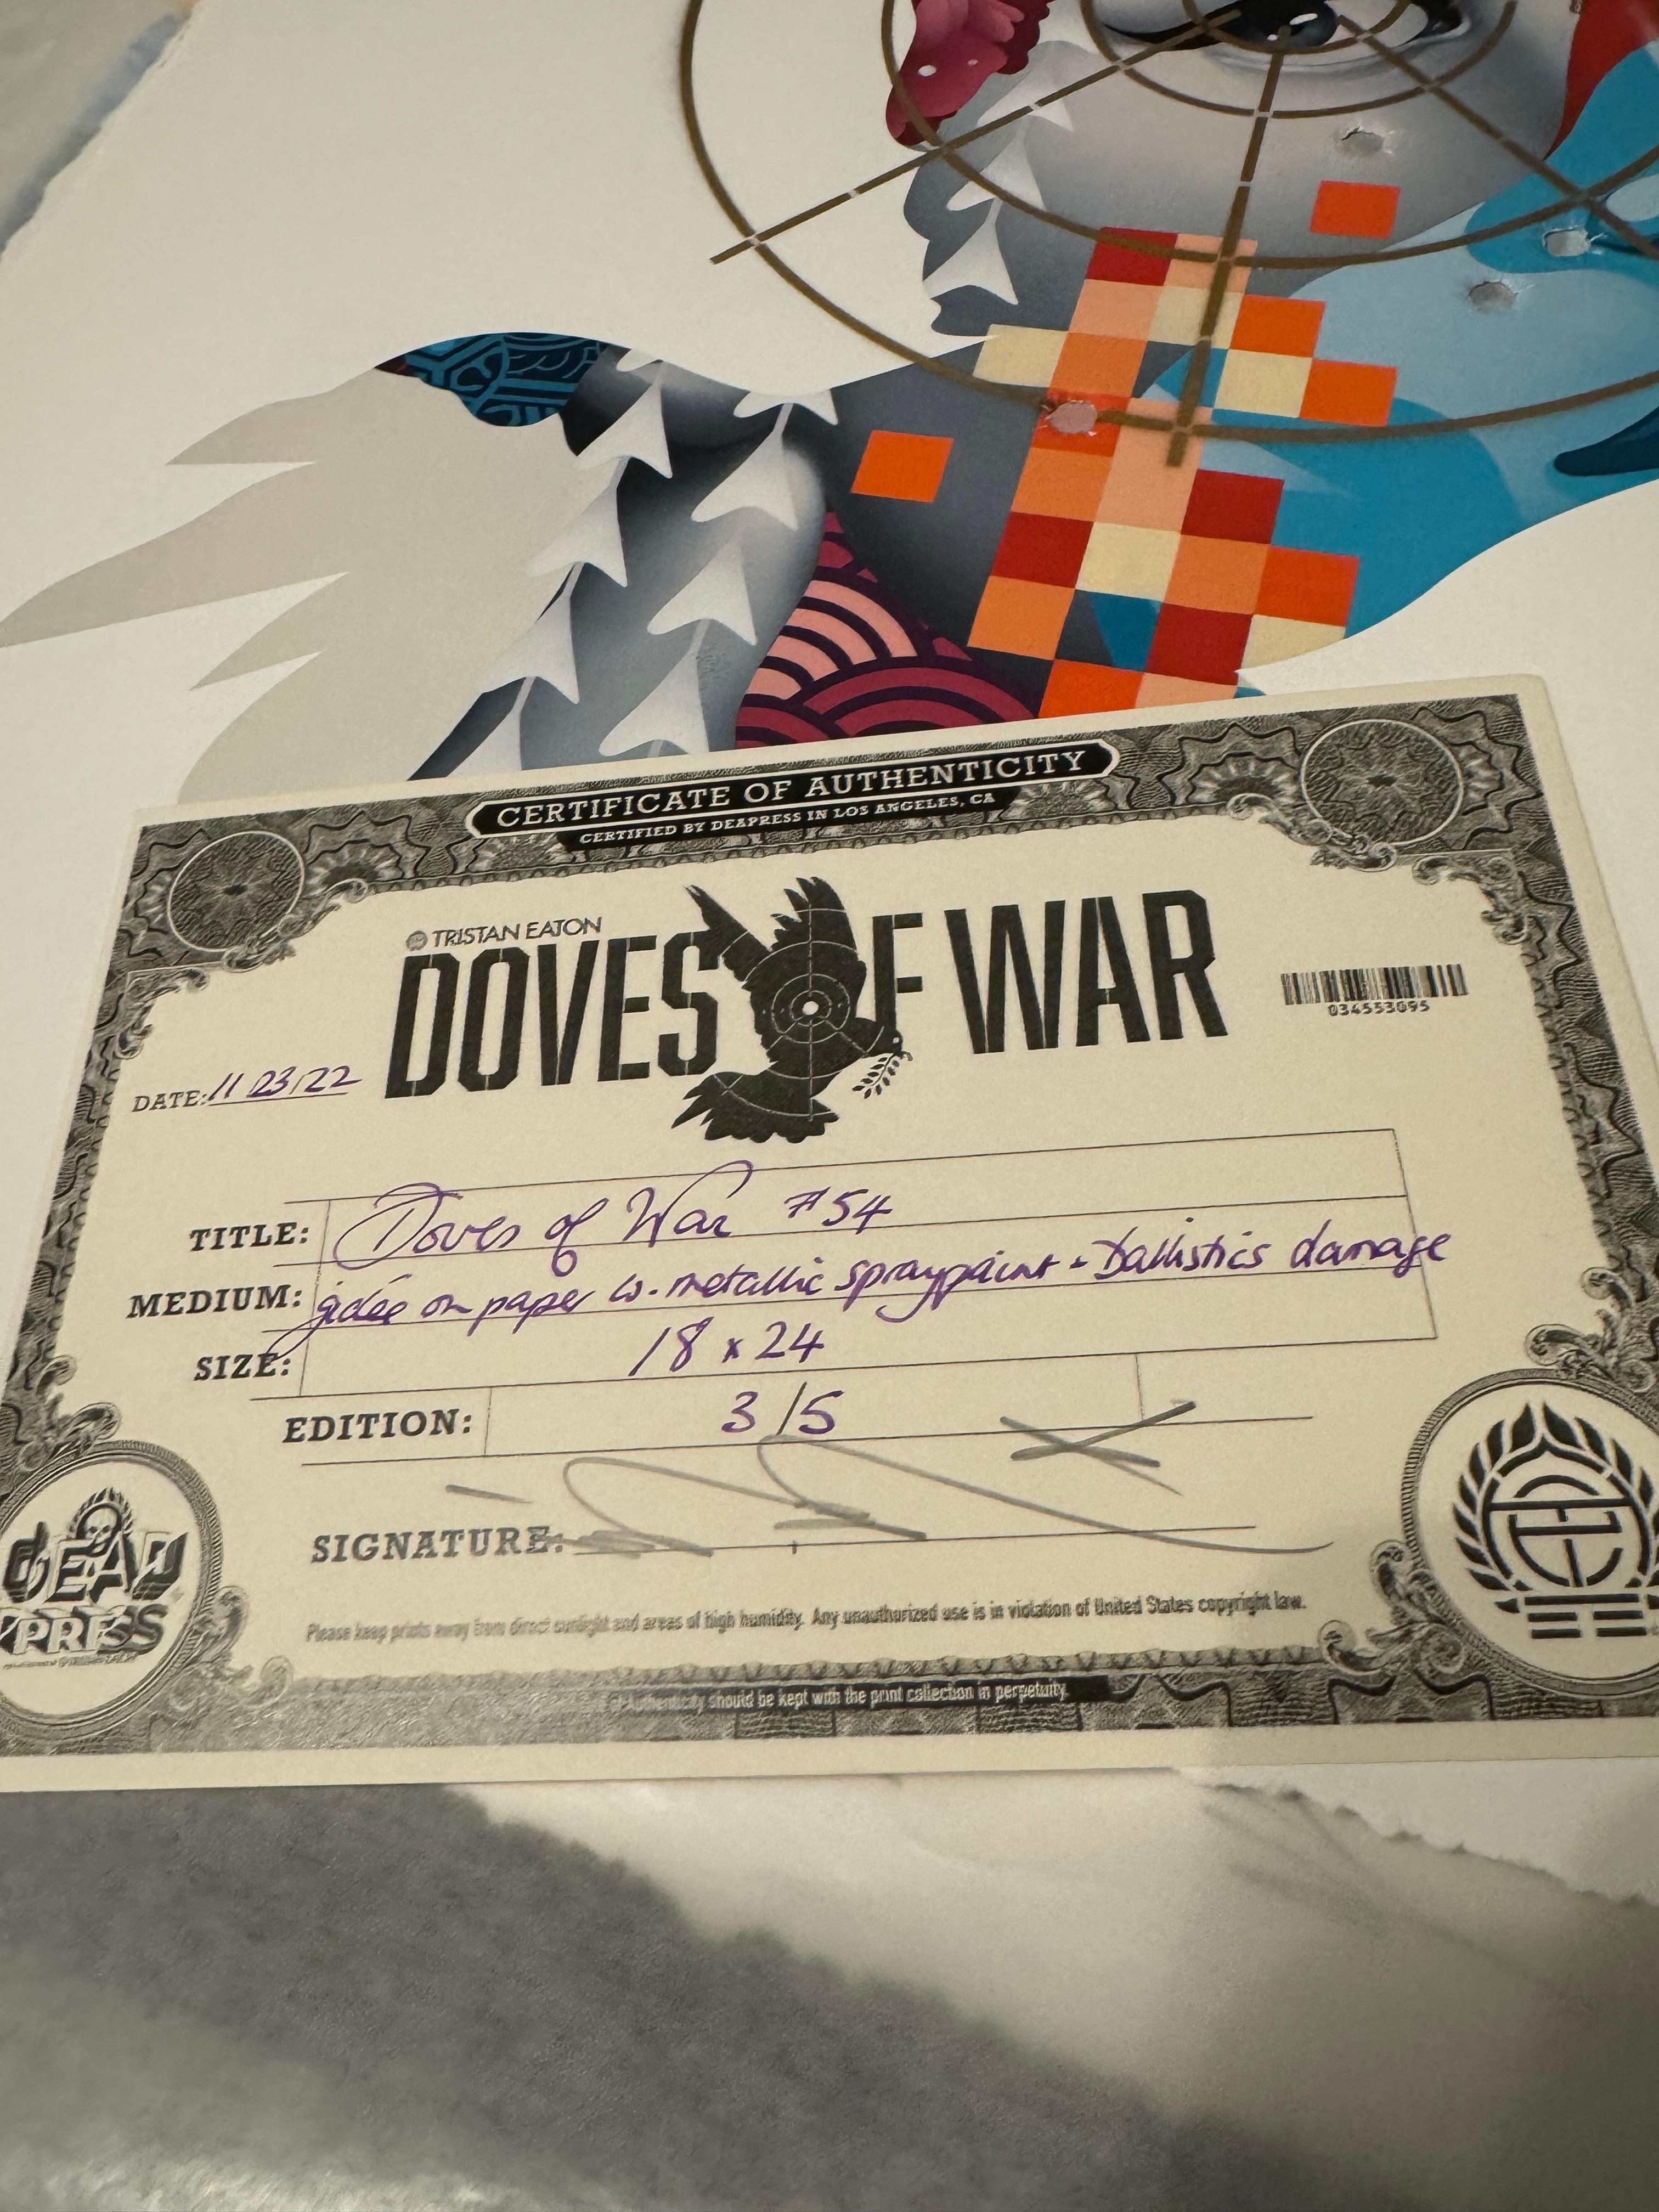 Doves of War #54 Spraypaint Embellished Screenprint Signed and Numbered - Print by Tristan Eaton